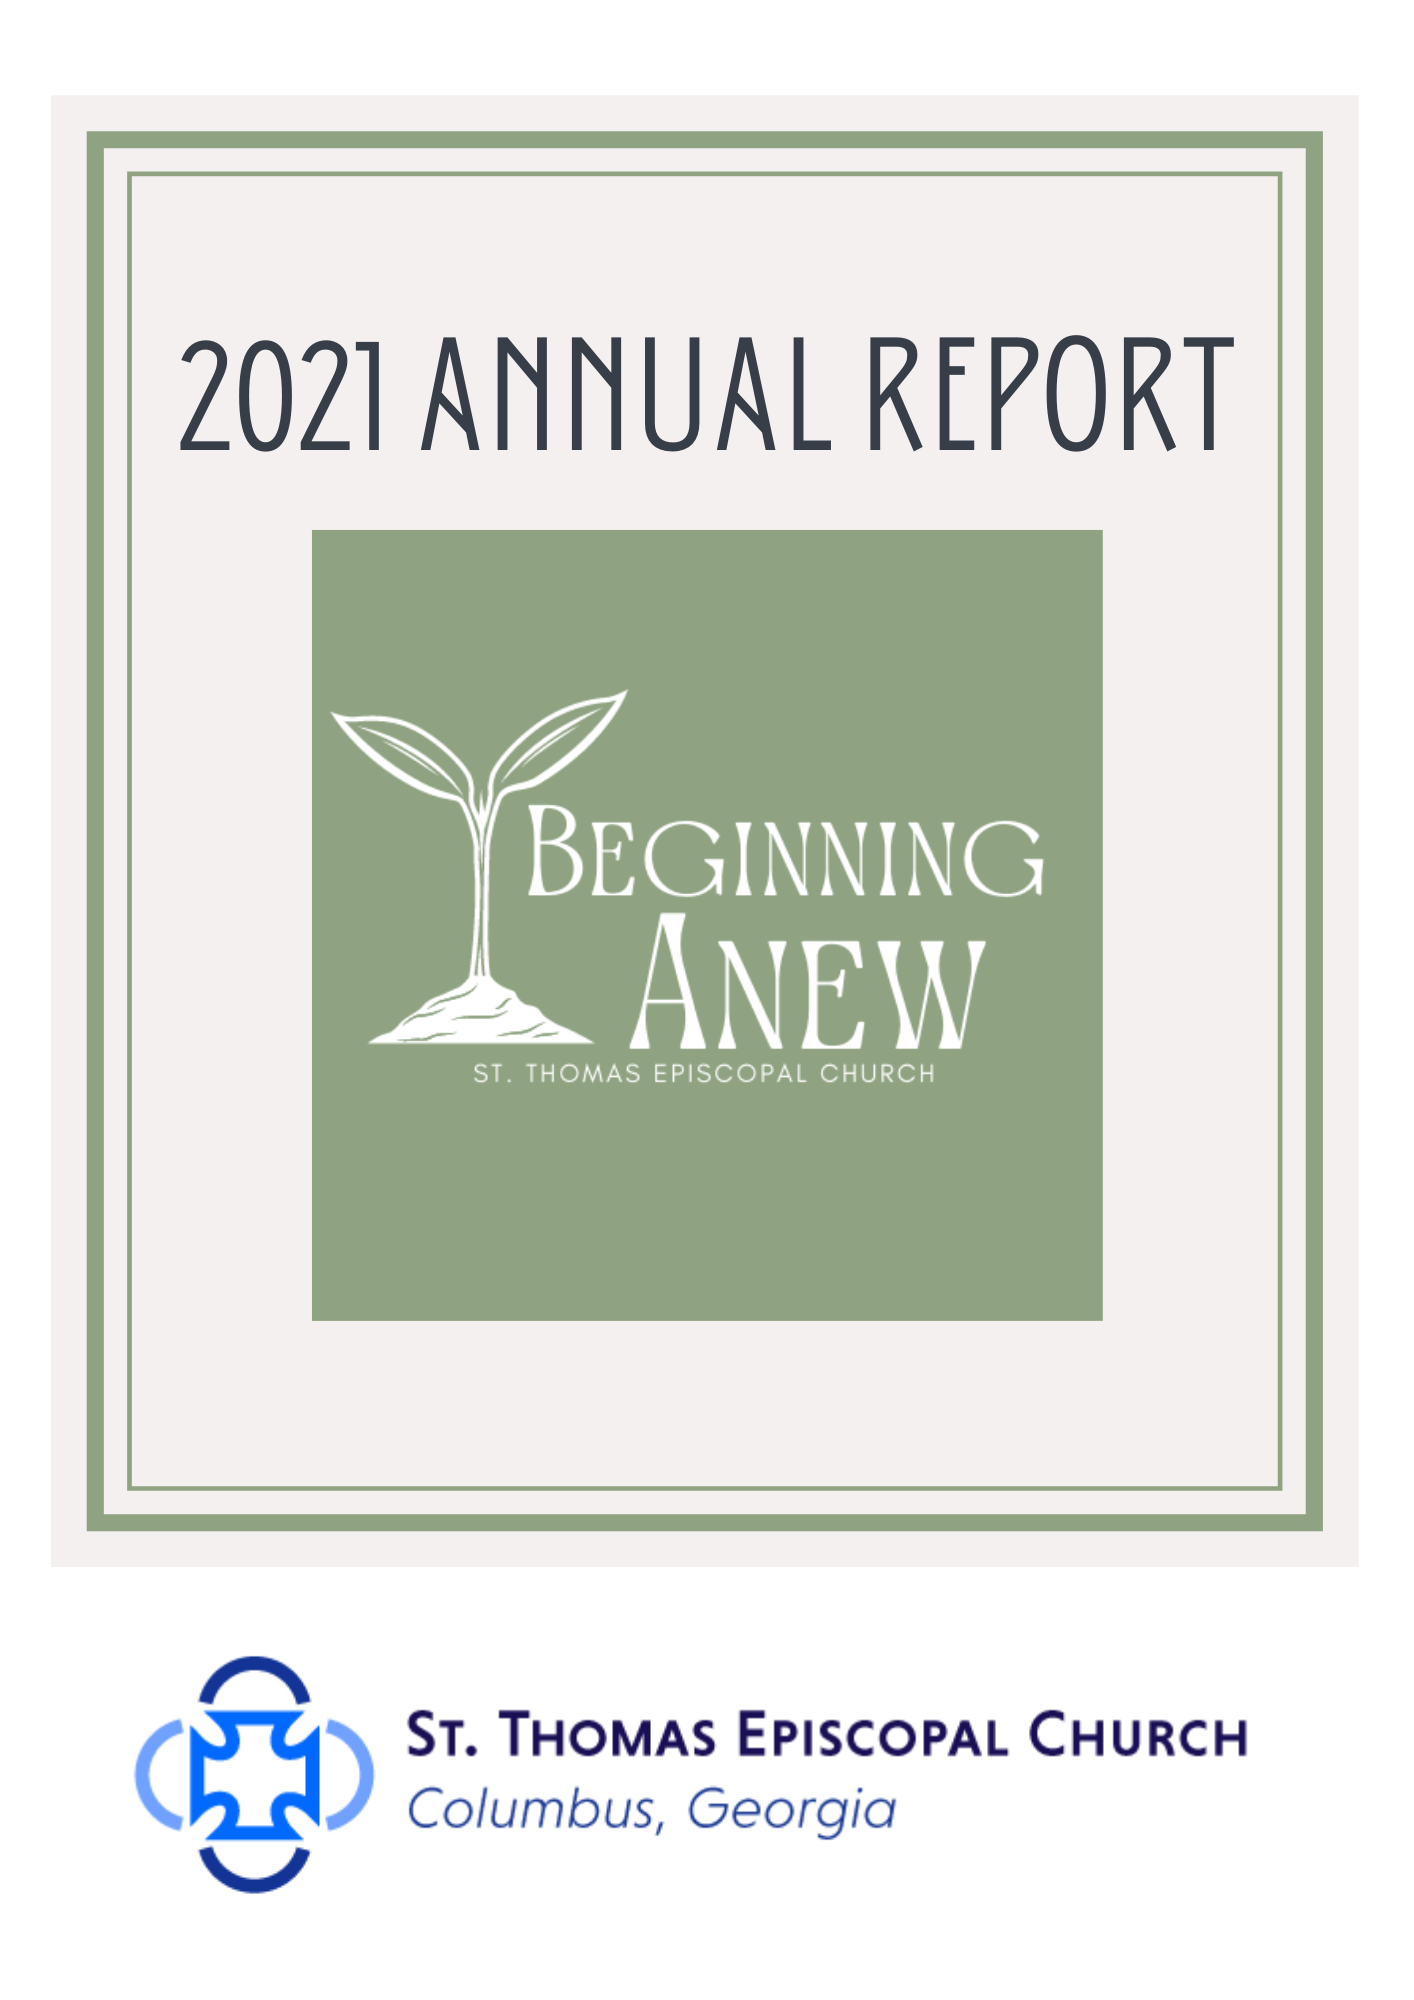 2021-long-version-annual-report_760